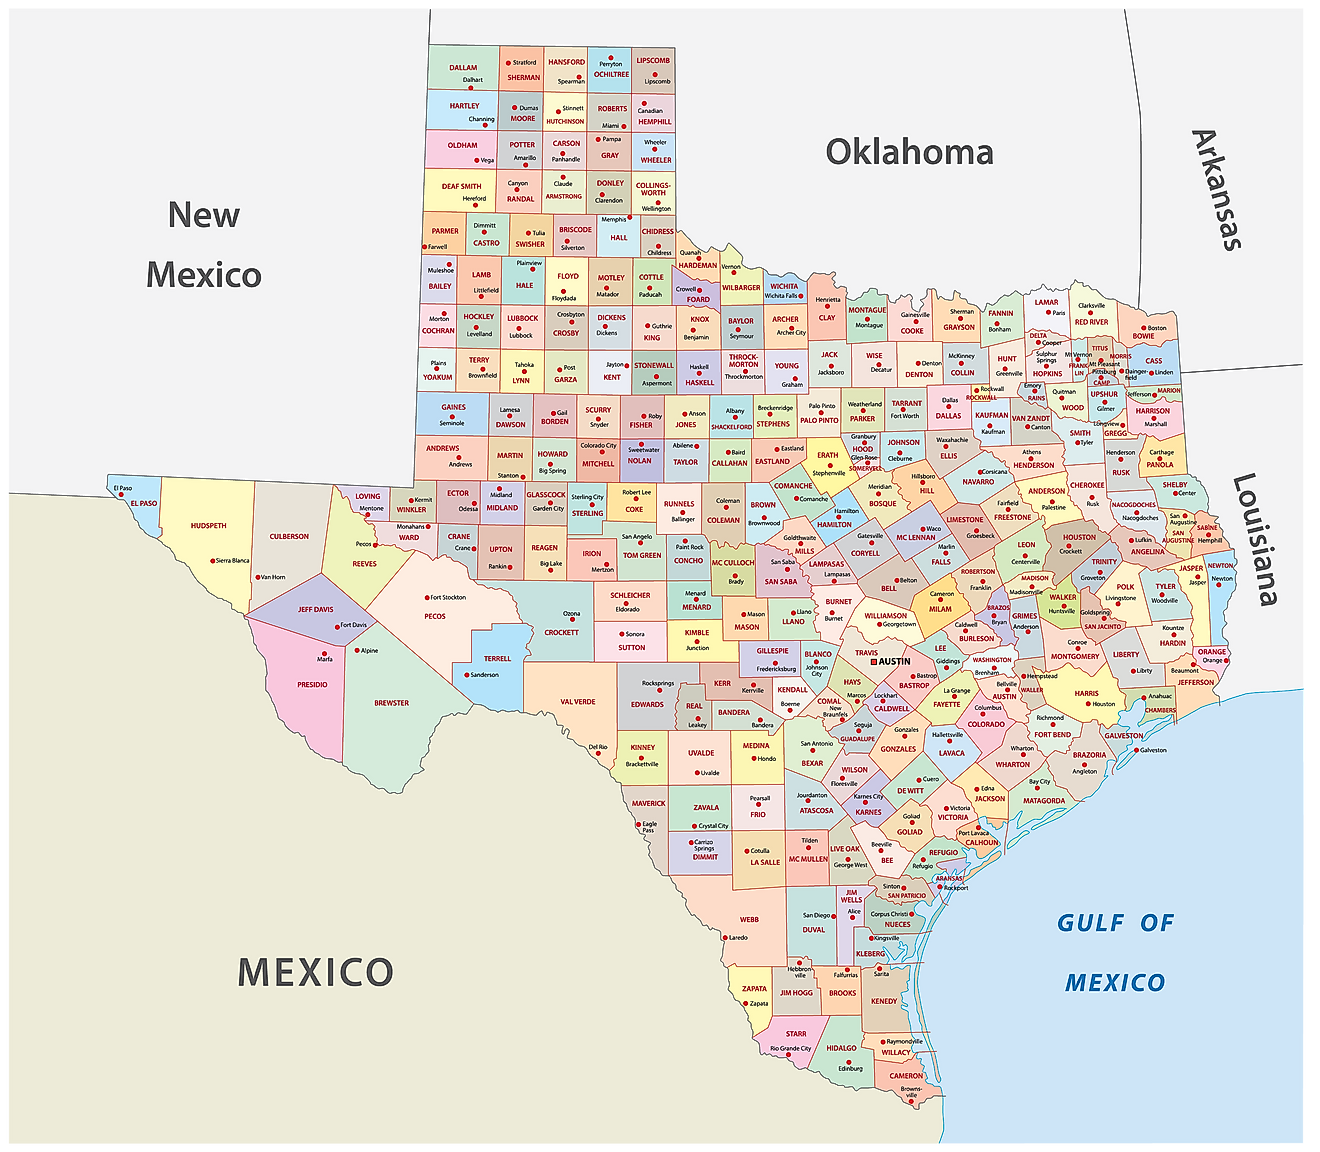 Administrative Map of Texas showing its 254 counties and the capital city - Austin